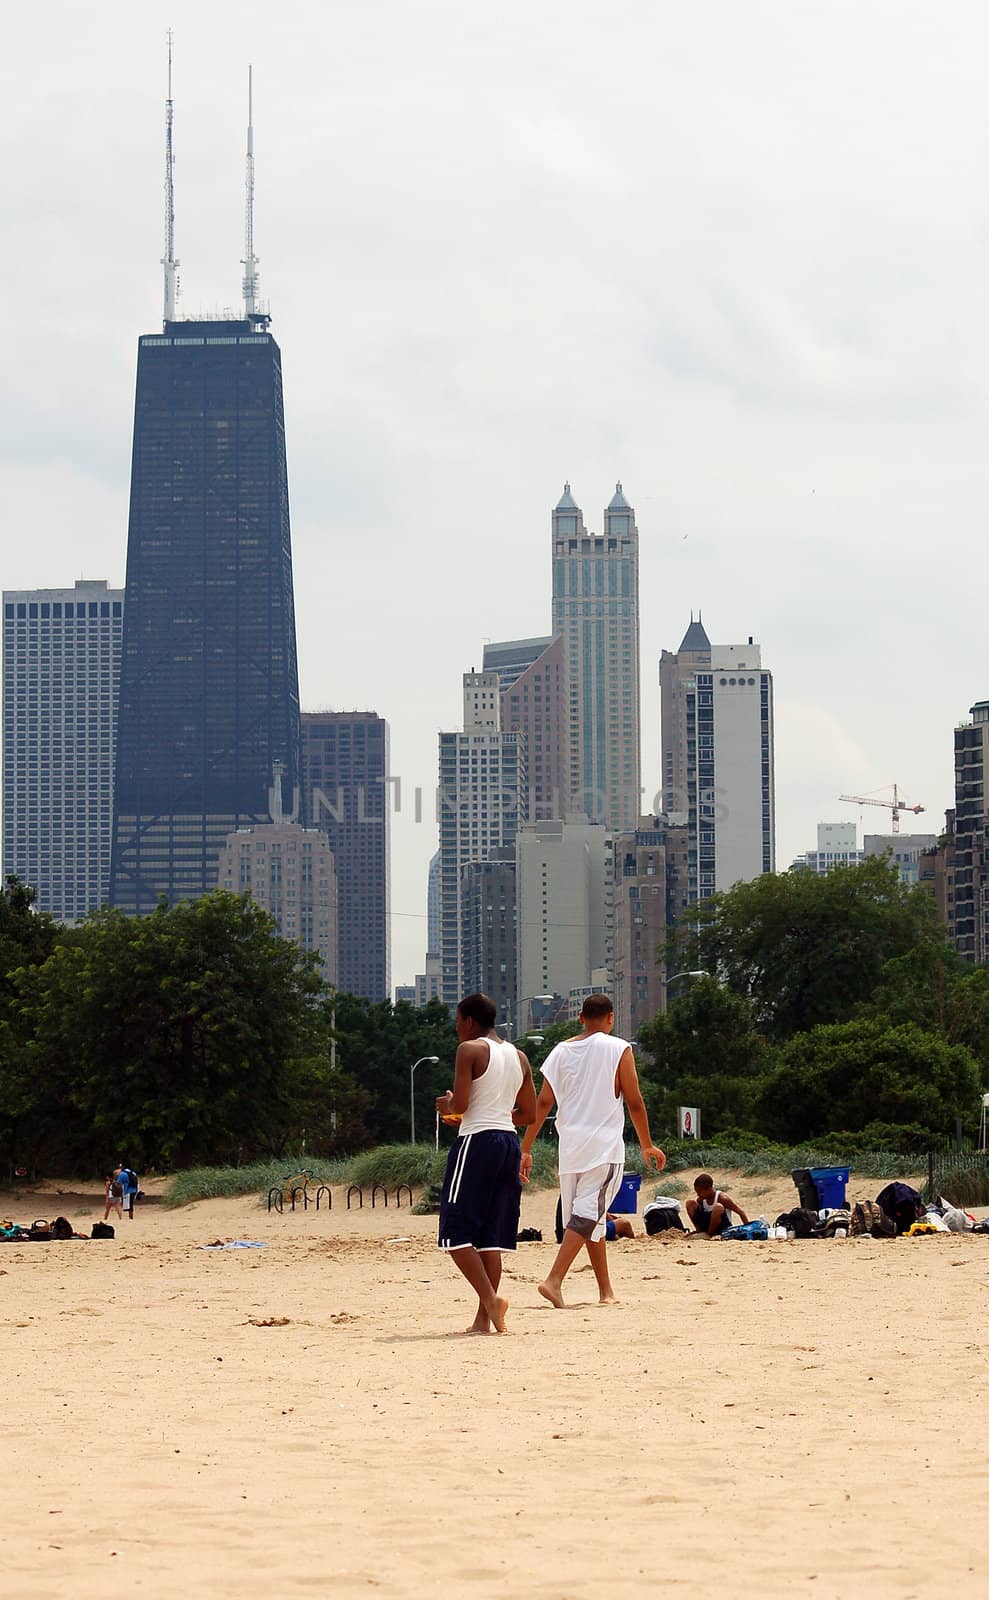 A view of Chicago from the shore of lake Michigan